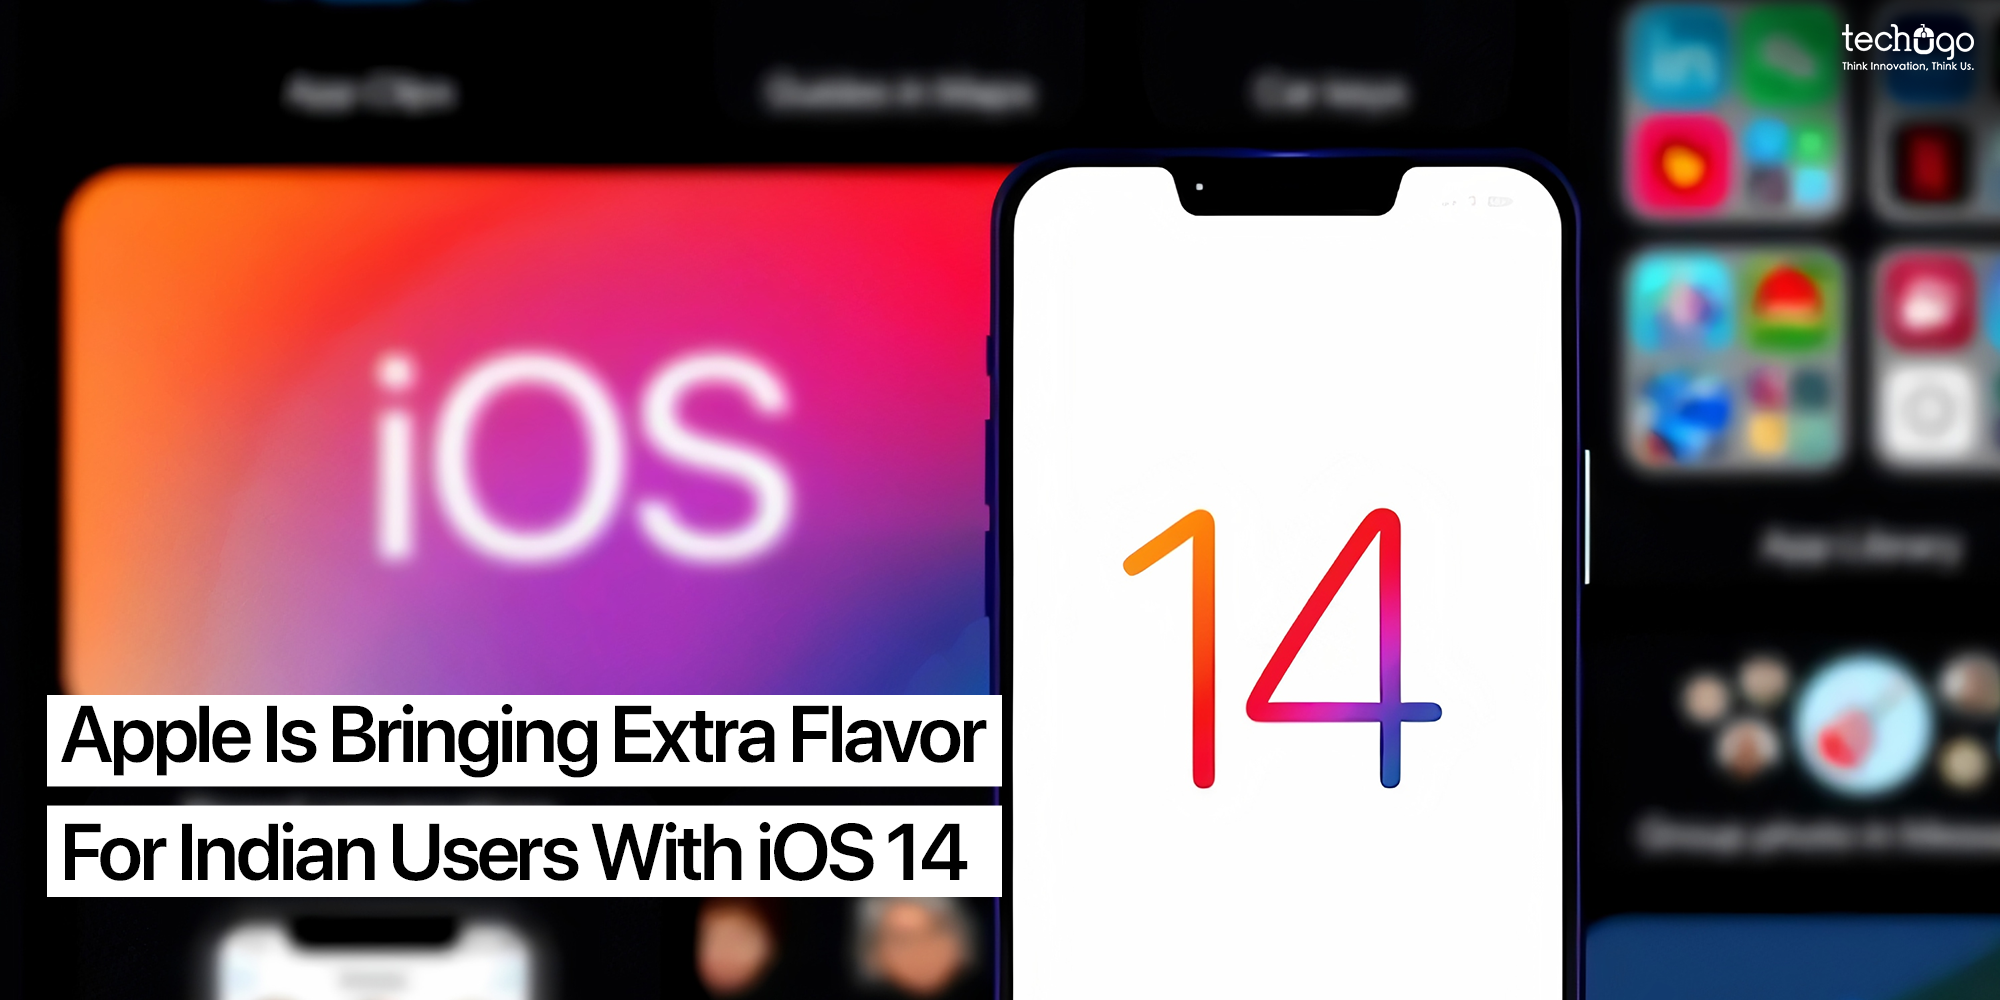 APPLE IS BRINGING EXTRA FLAVOR FOR INDIAN USERS WITH iOS 14